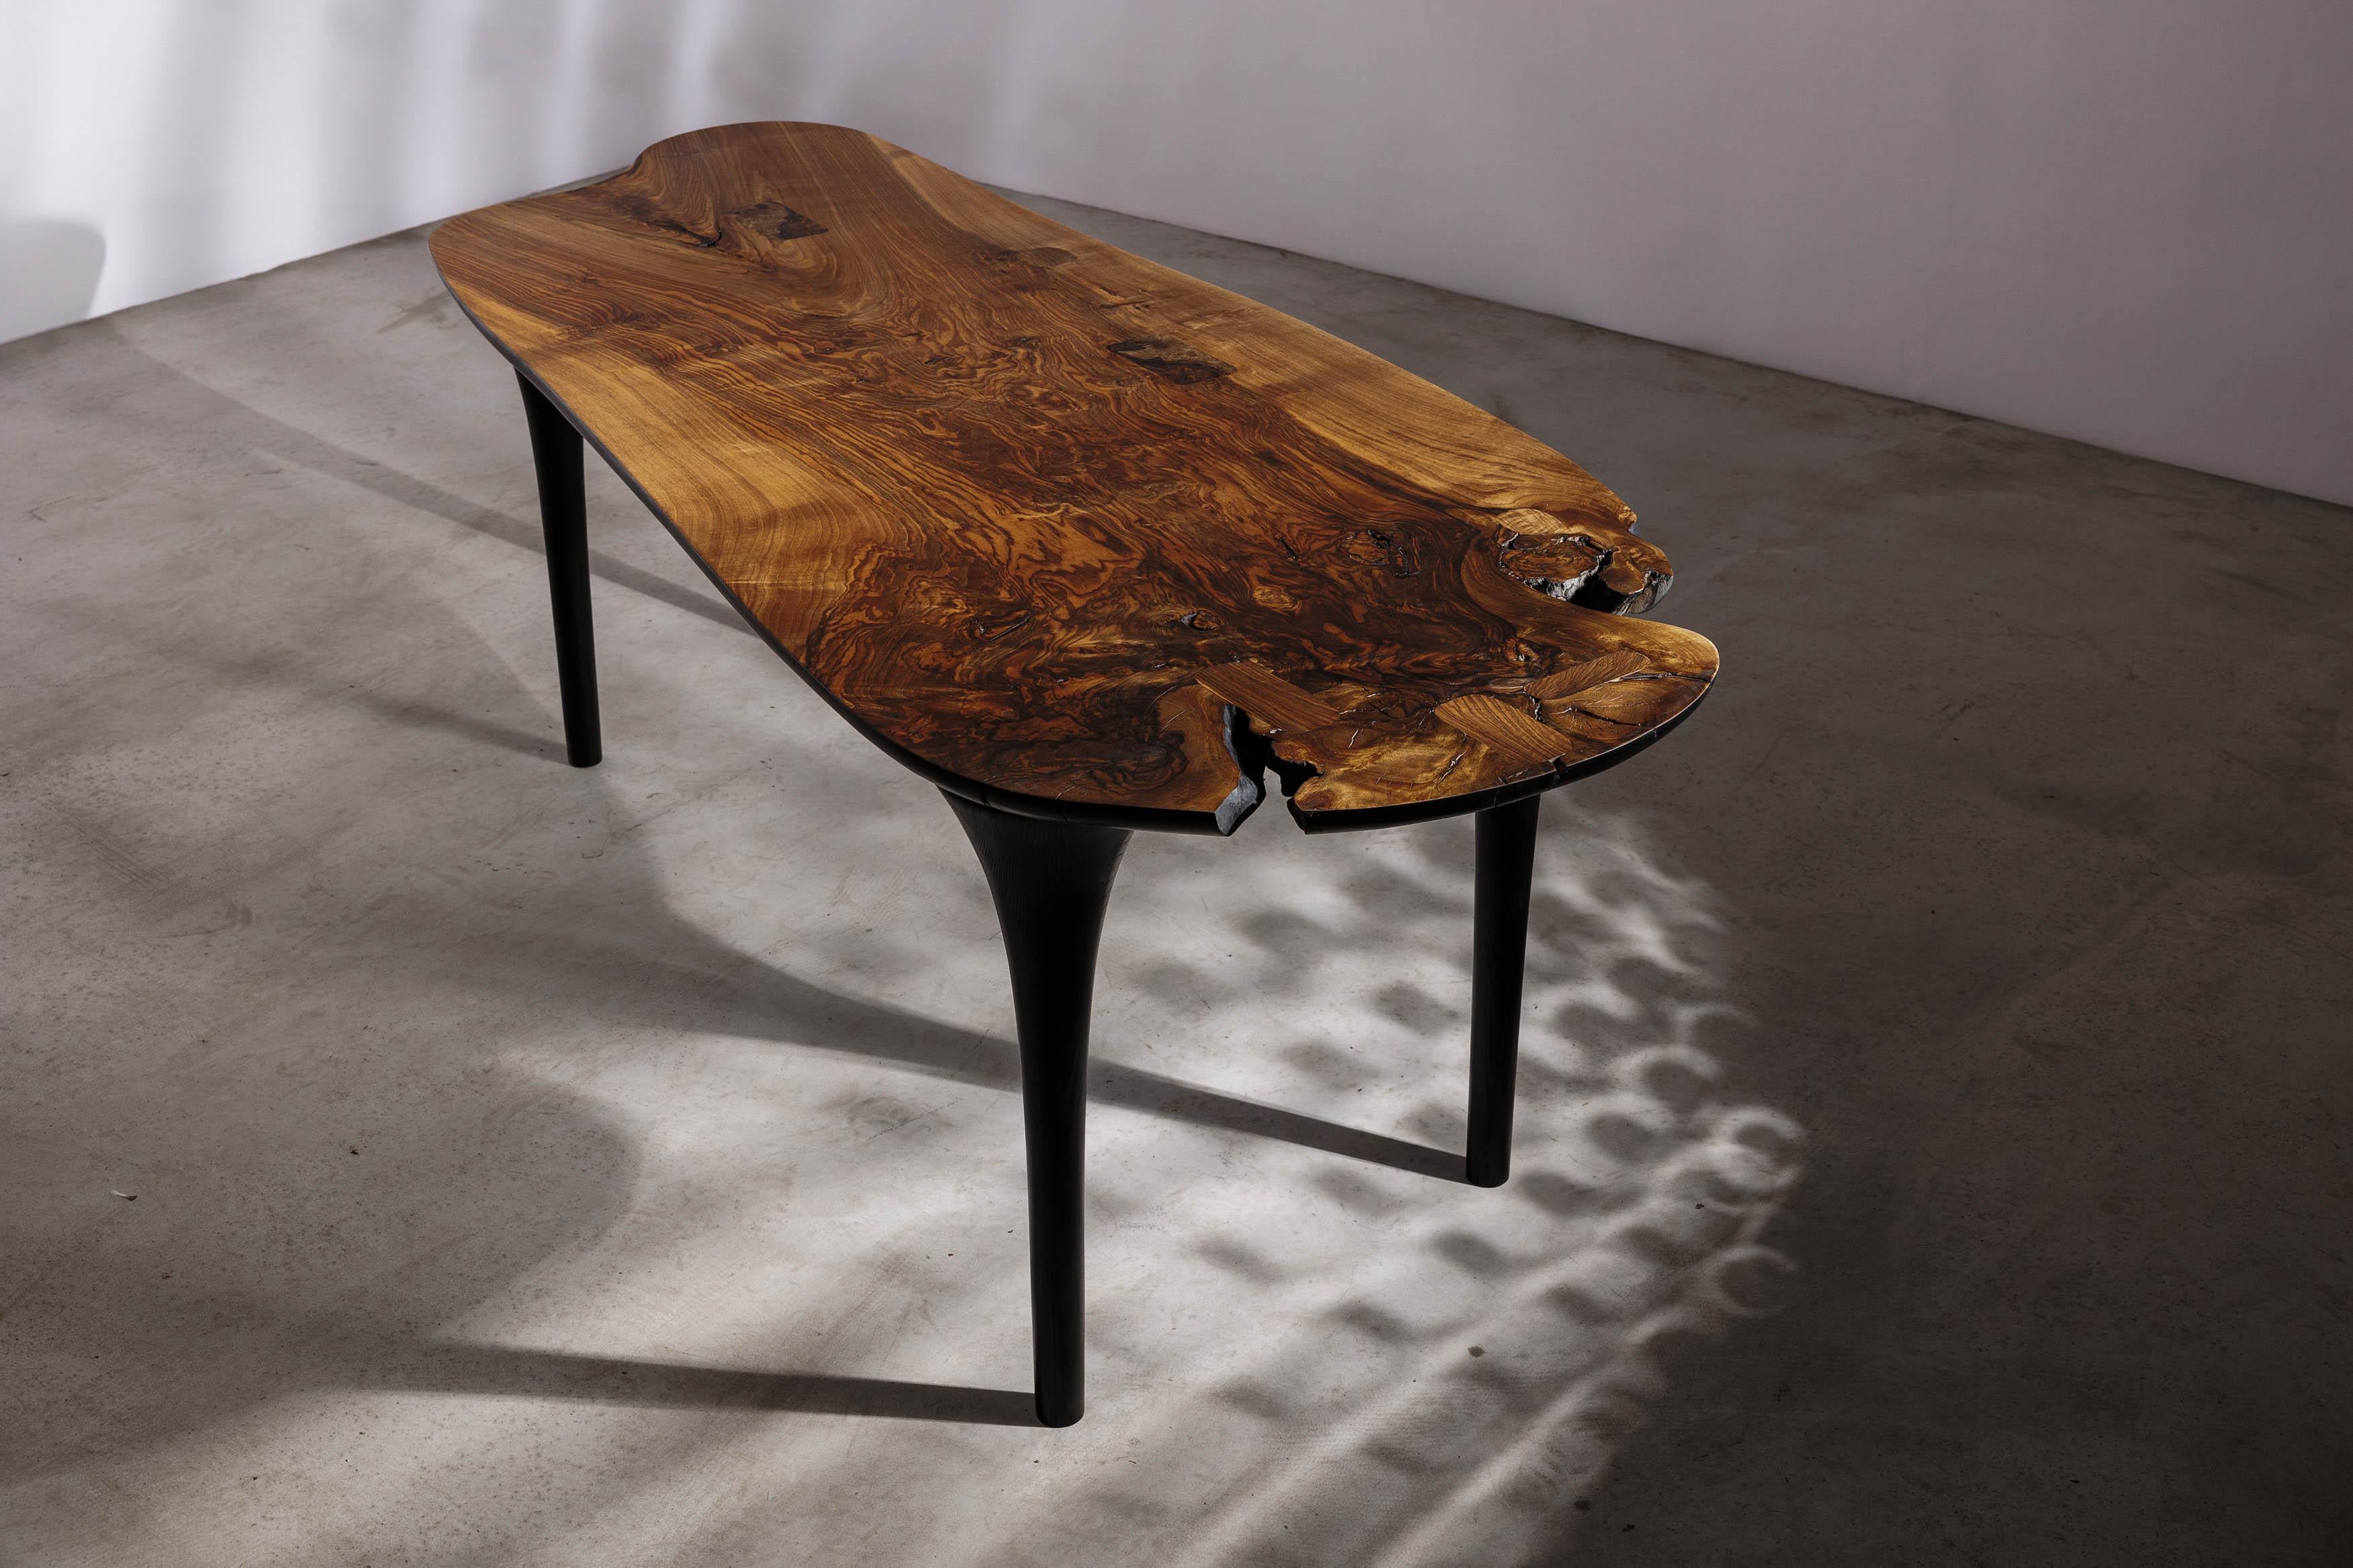 EM213 dining table by Eero Moss
One of a kind
Dimensions; W 218 x D 85 x H 78 cm
Materials: Walnut, ash, India ink.
Finish: Natural oils.

Erosio Collection

This collection is an ode to the fluid, organic shapes found in the natural world.